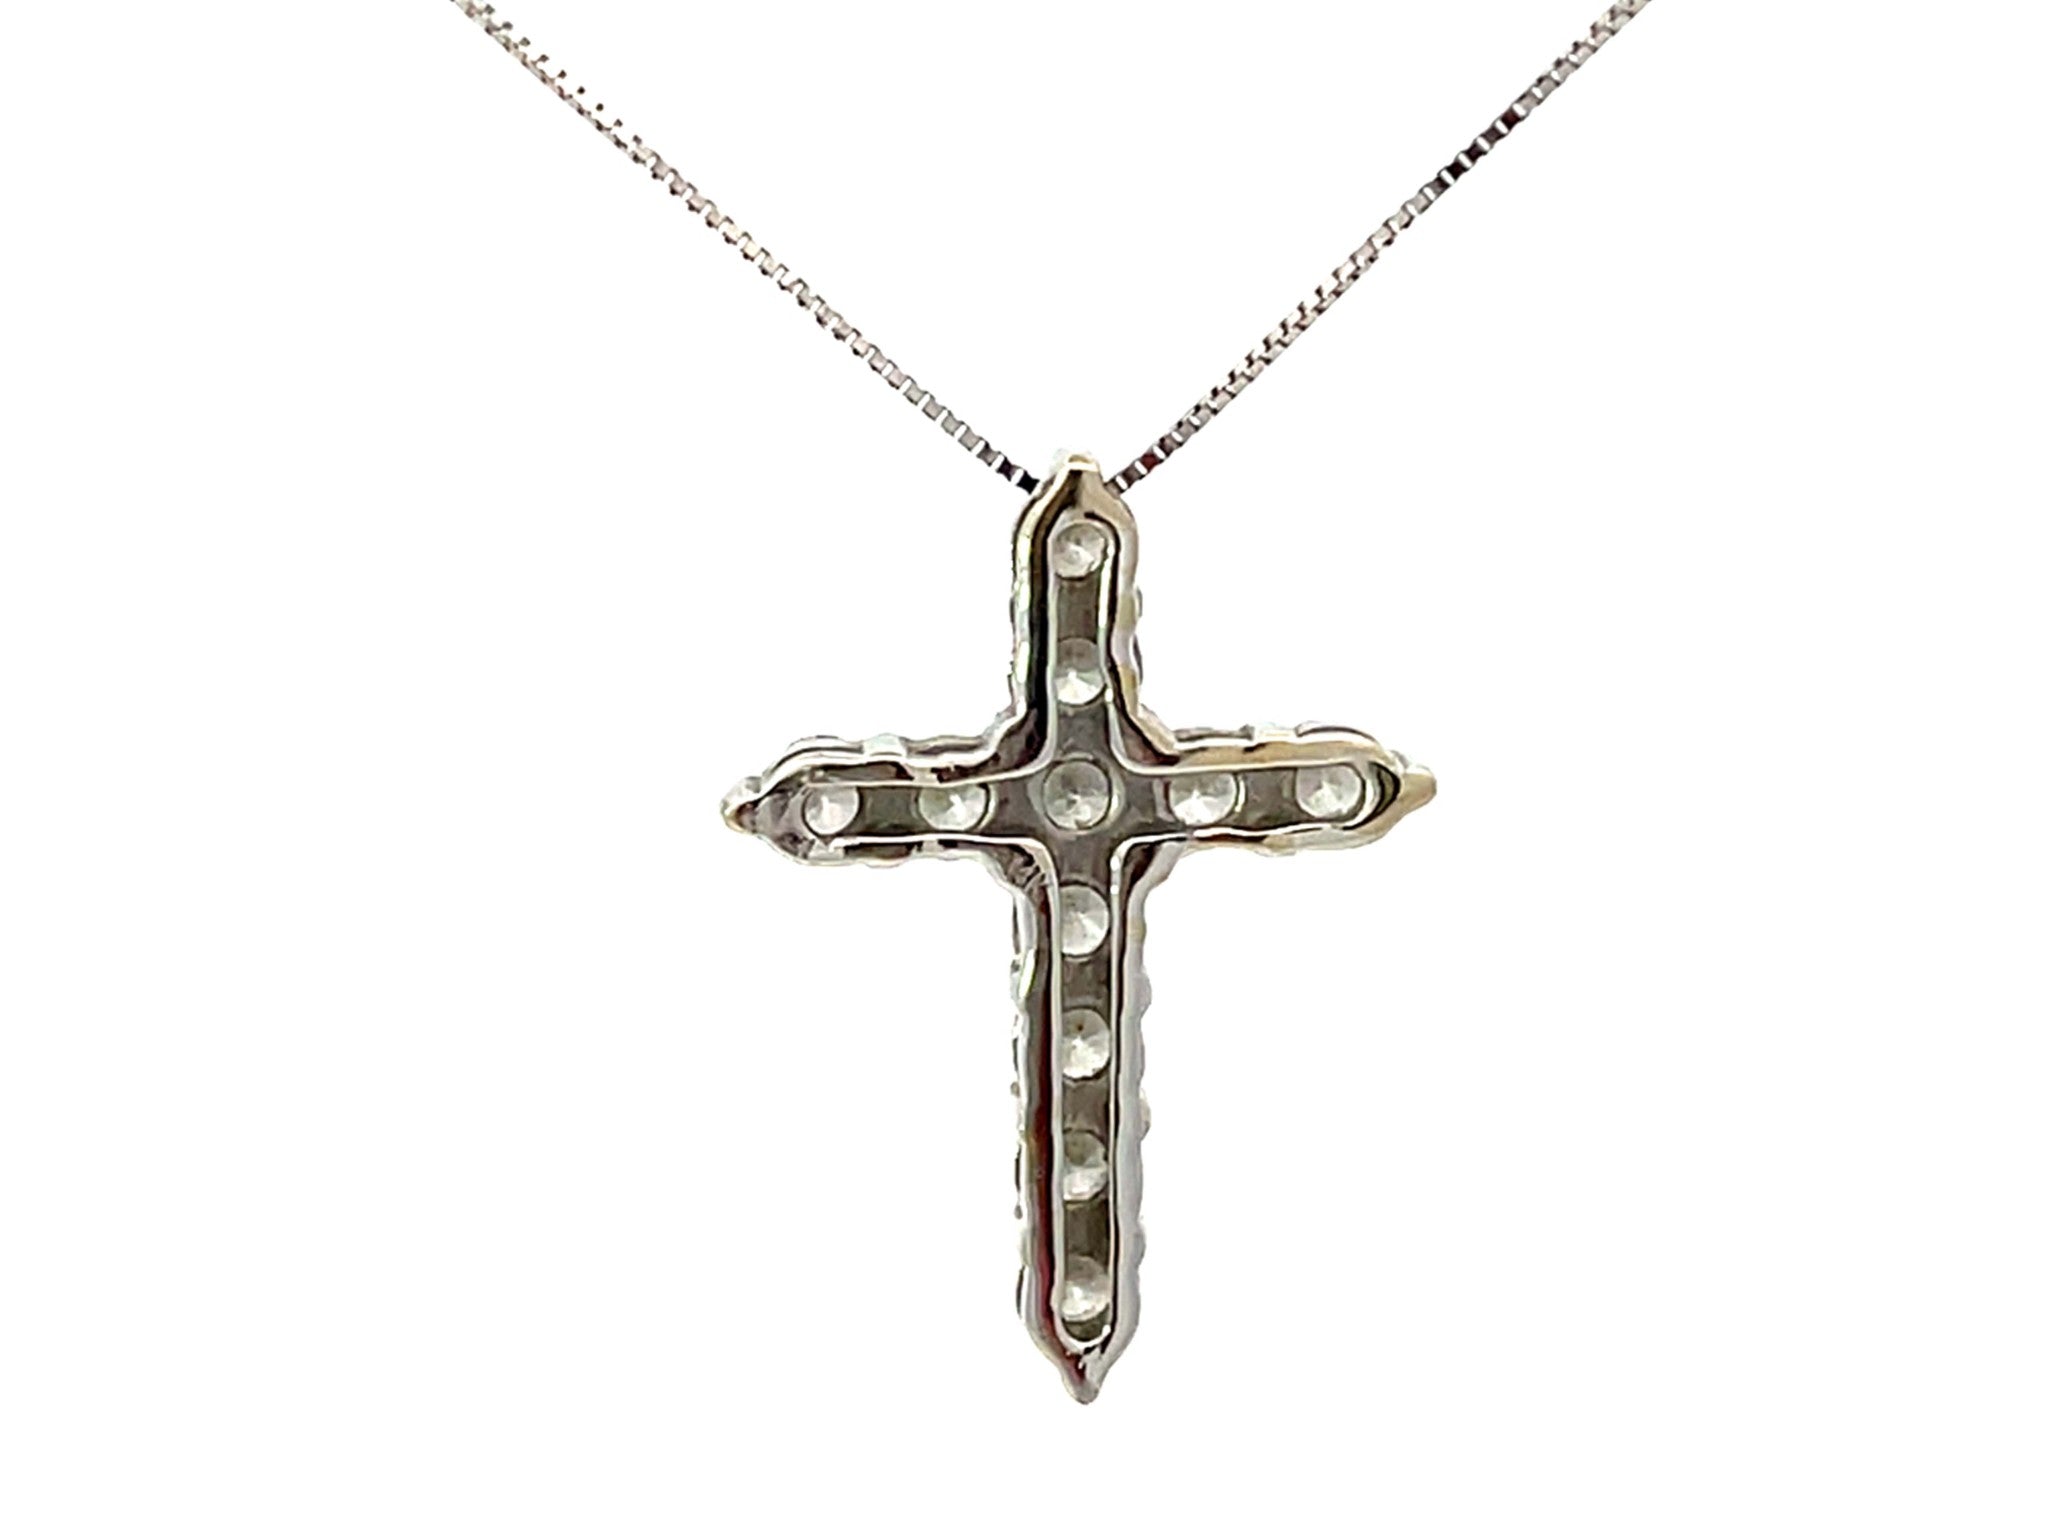 Diamond Cross Necklace Solid 14k White Gold